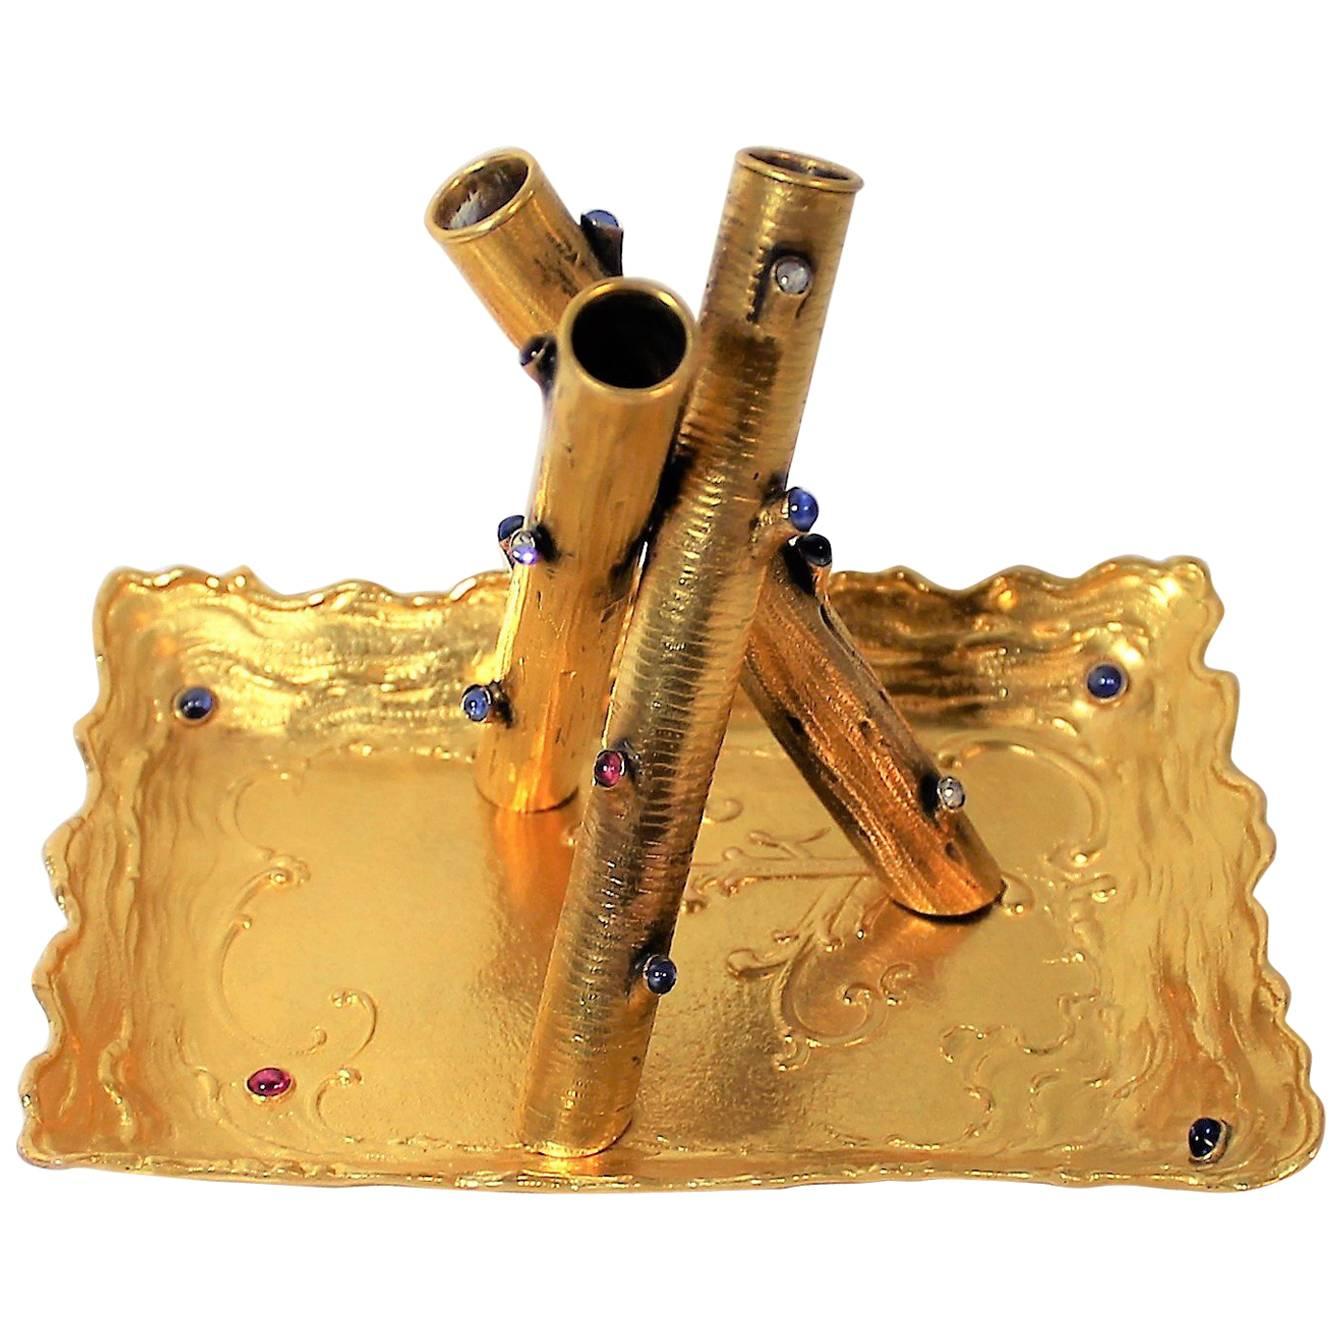 14-Karat Gold Pen Holder and Tray with Diamonds, Rubies and Sapphires